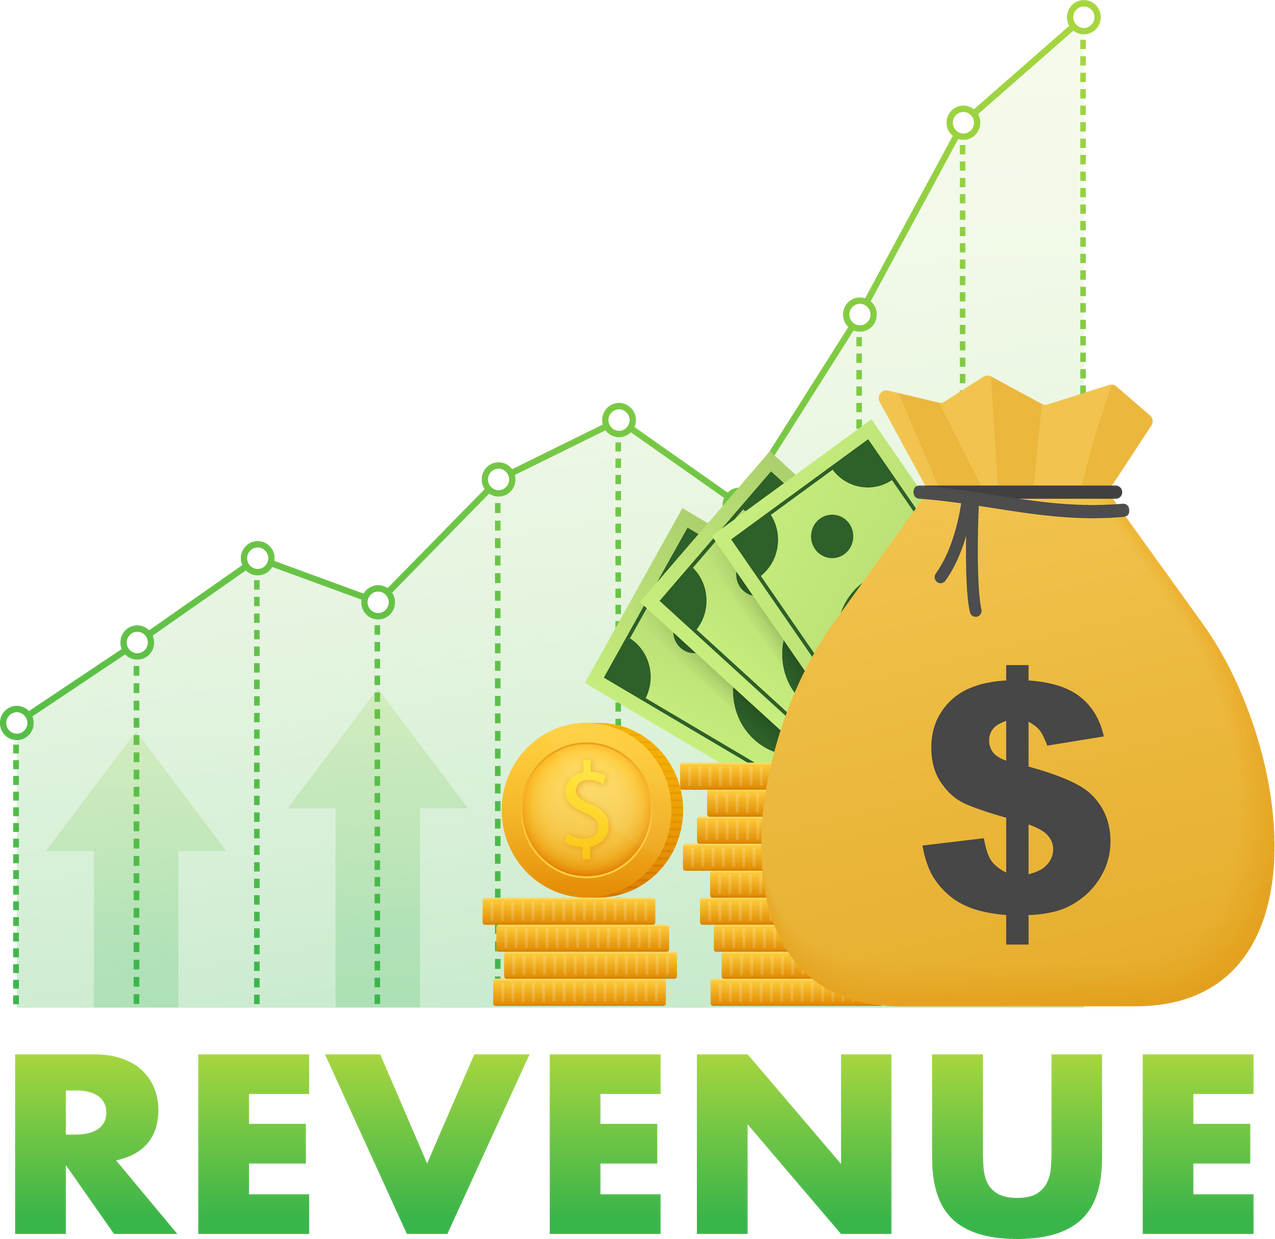 Revenue growth increasing graph. High interest rate. Vector stock illustration.